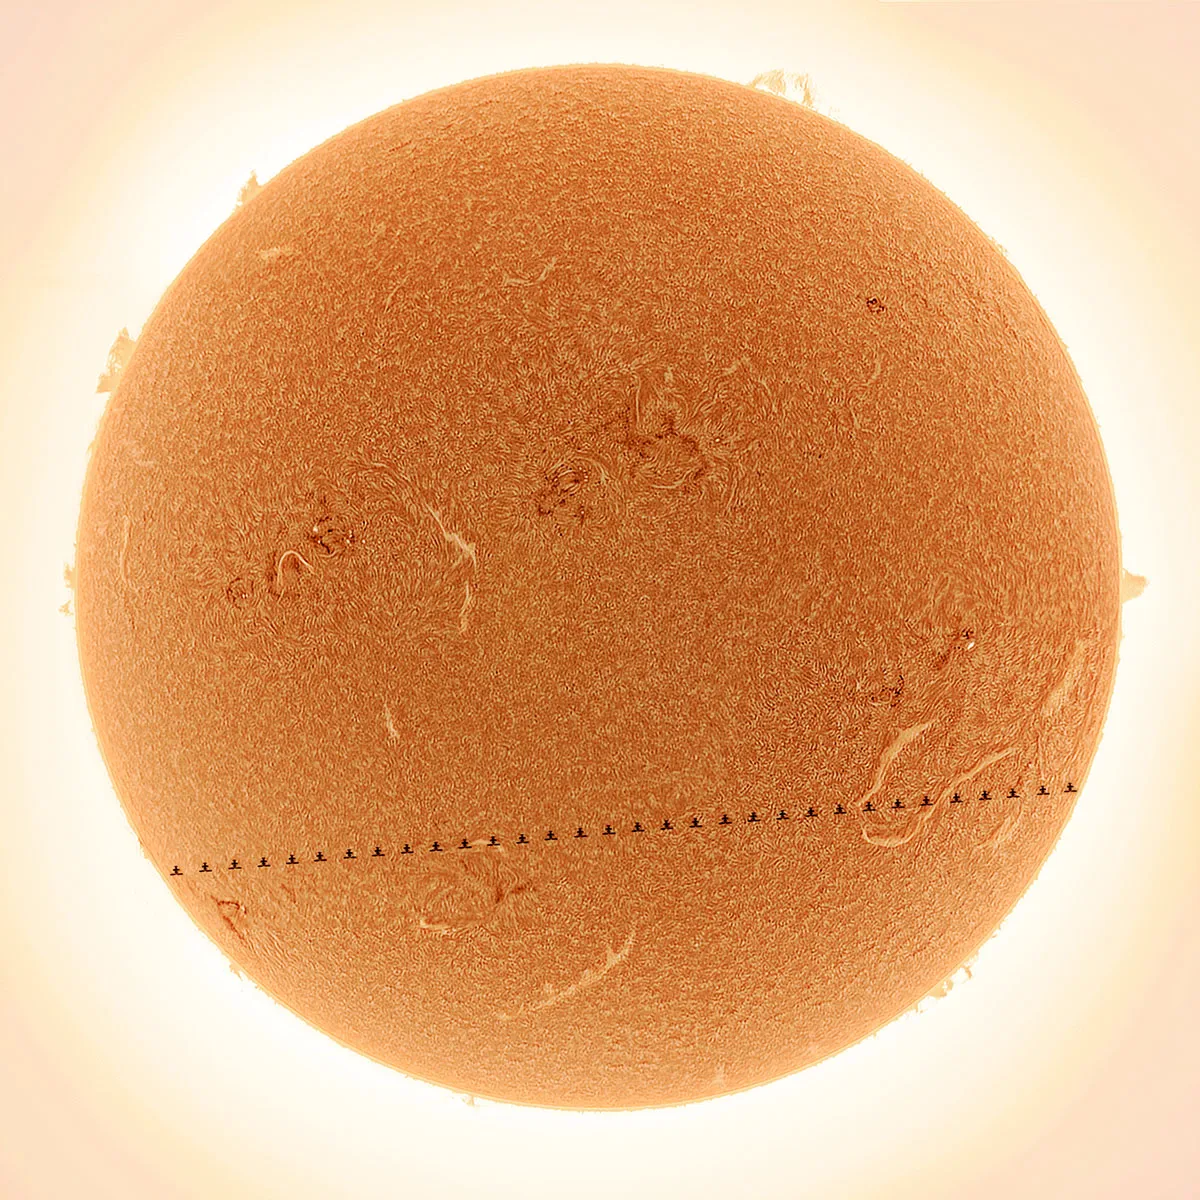 China Space Station Transits Active Sun, by Letian Wang, Beijing, China. Category: People & Space Equipment: Lunt 152T telescope, Rainbow RST-135 mount, TeleVue 2X Barlow lens, ZWO ASI432MM camera, 900 mm f/6, 0.8-millisecond and 1.3-millisecond exposures